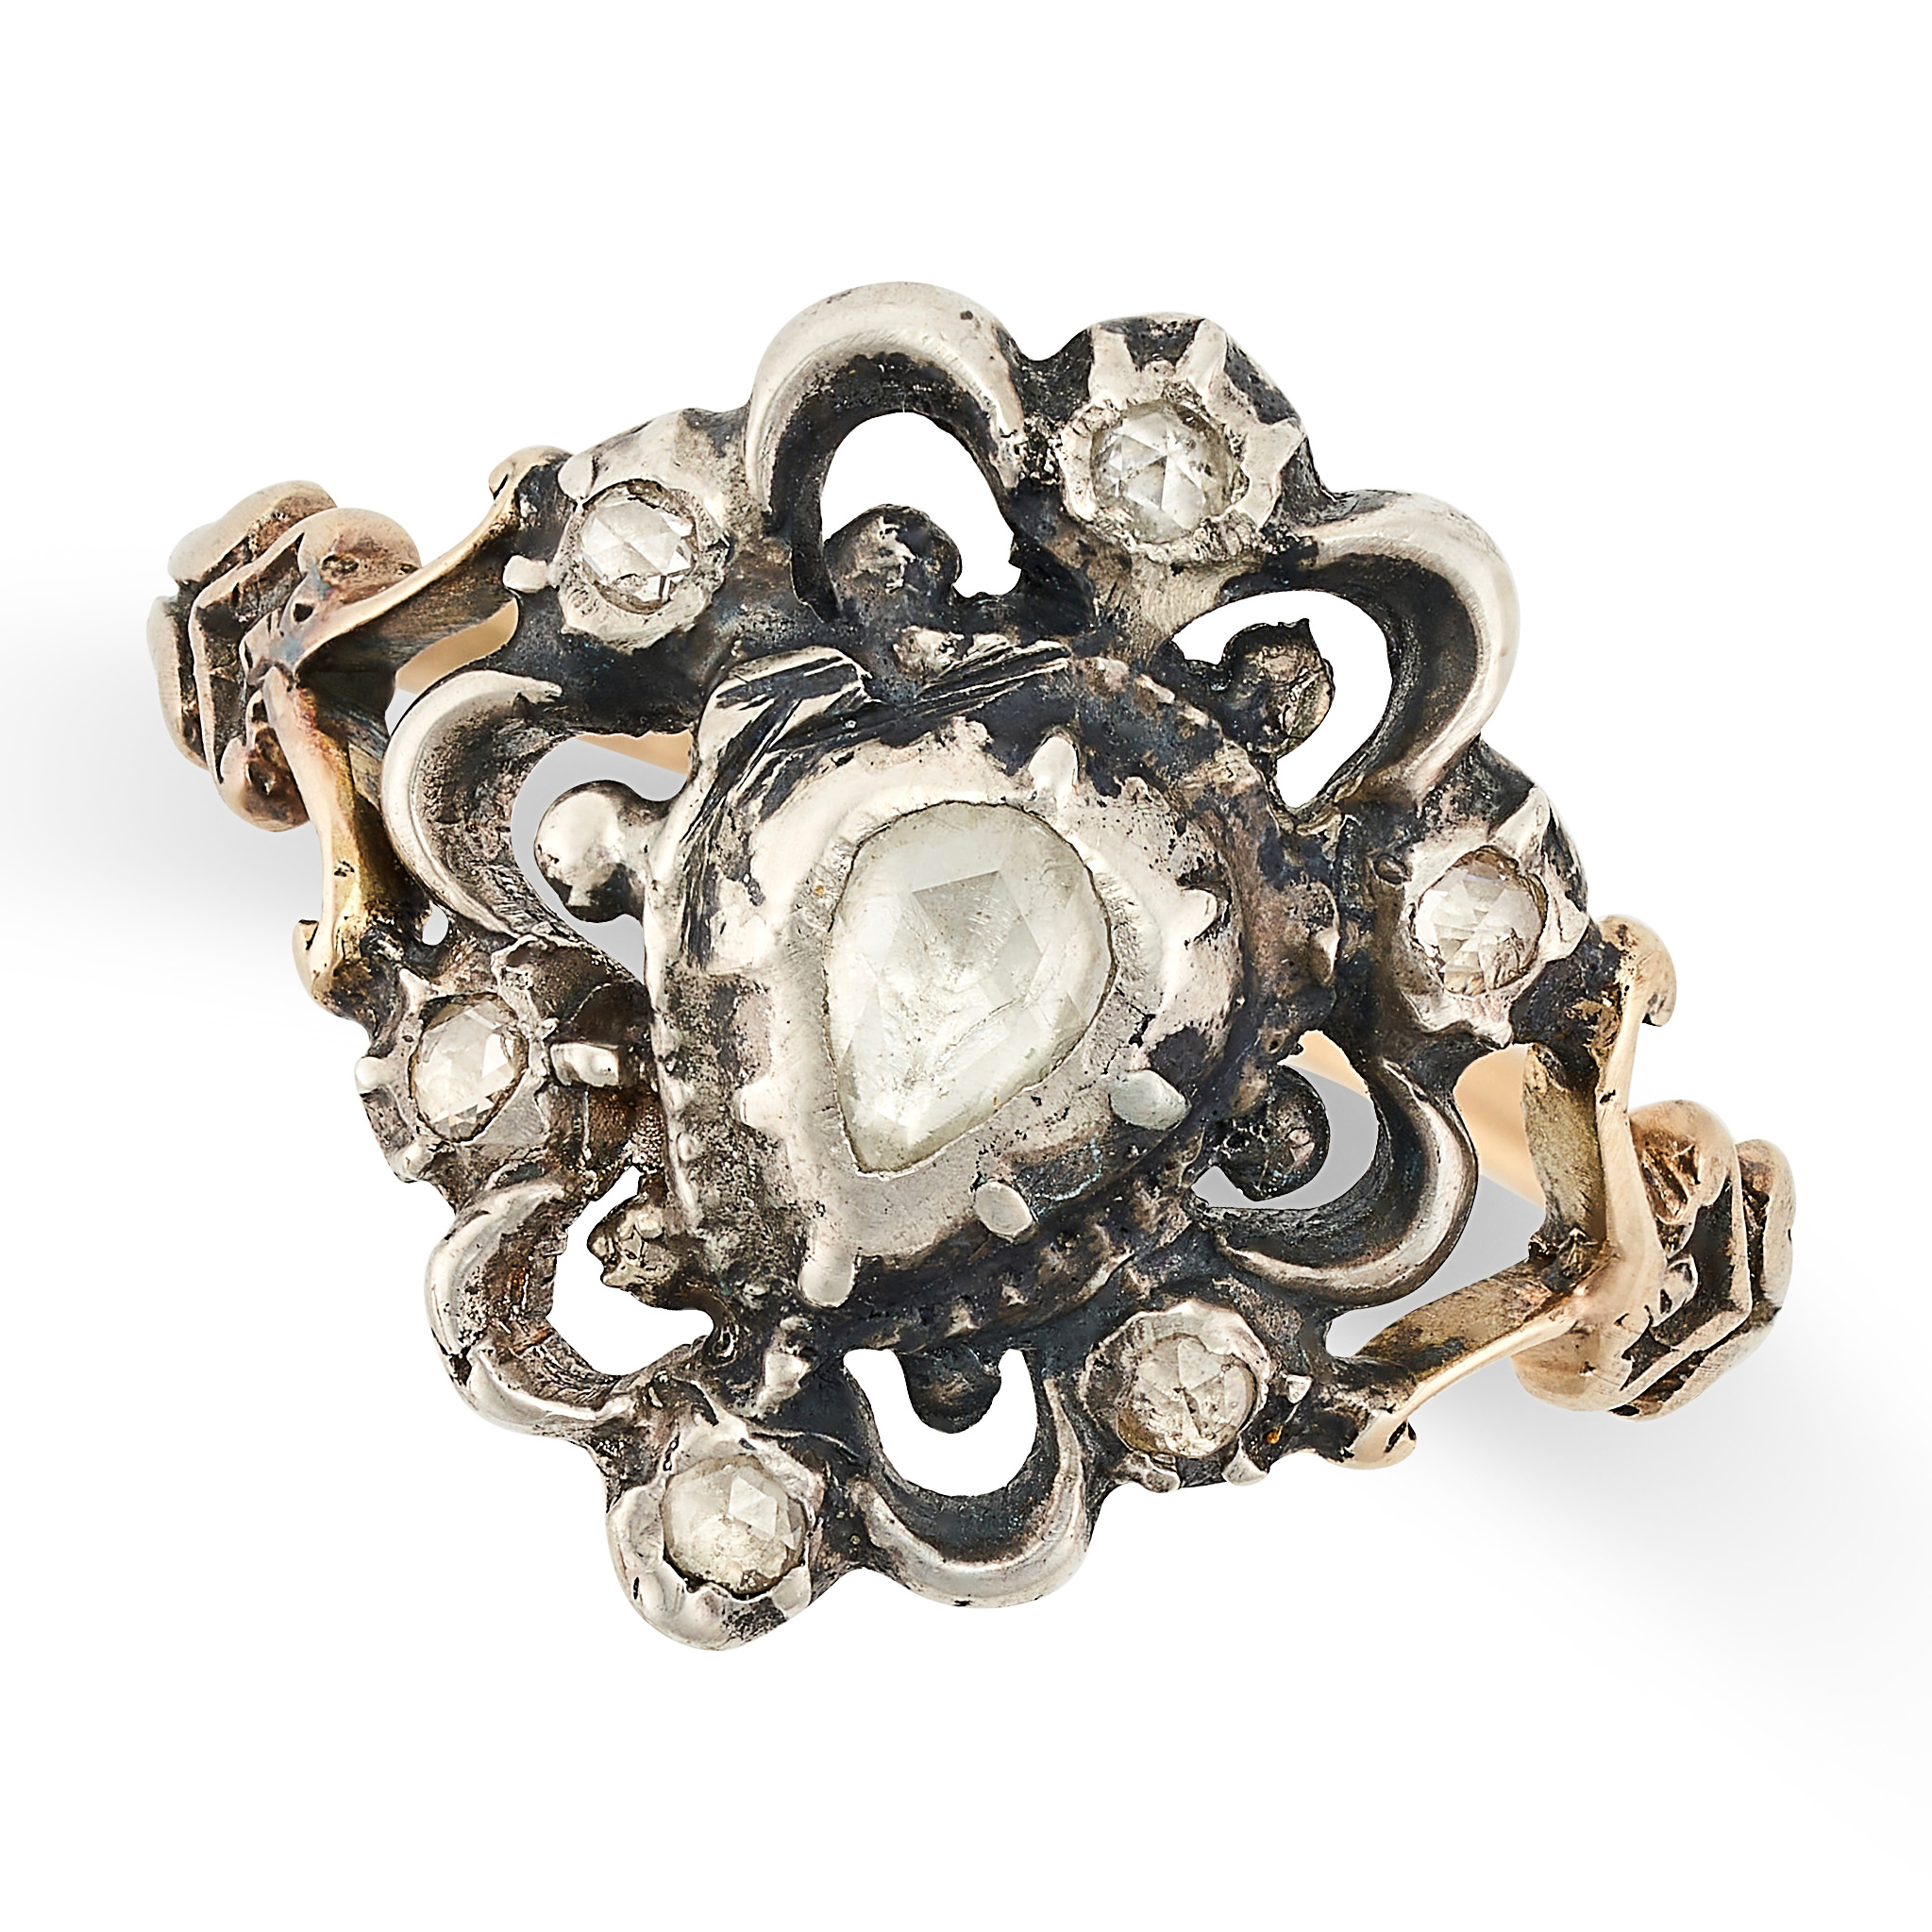 AN ANTIQUE GEORGIAN DIAMOND RING, EARLY 19TH CENTURY in yellow gold and silver, set with a pear